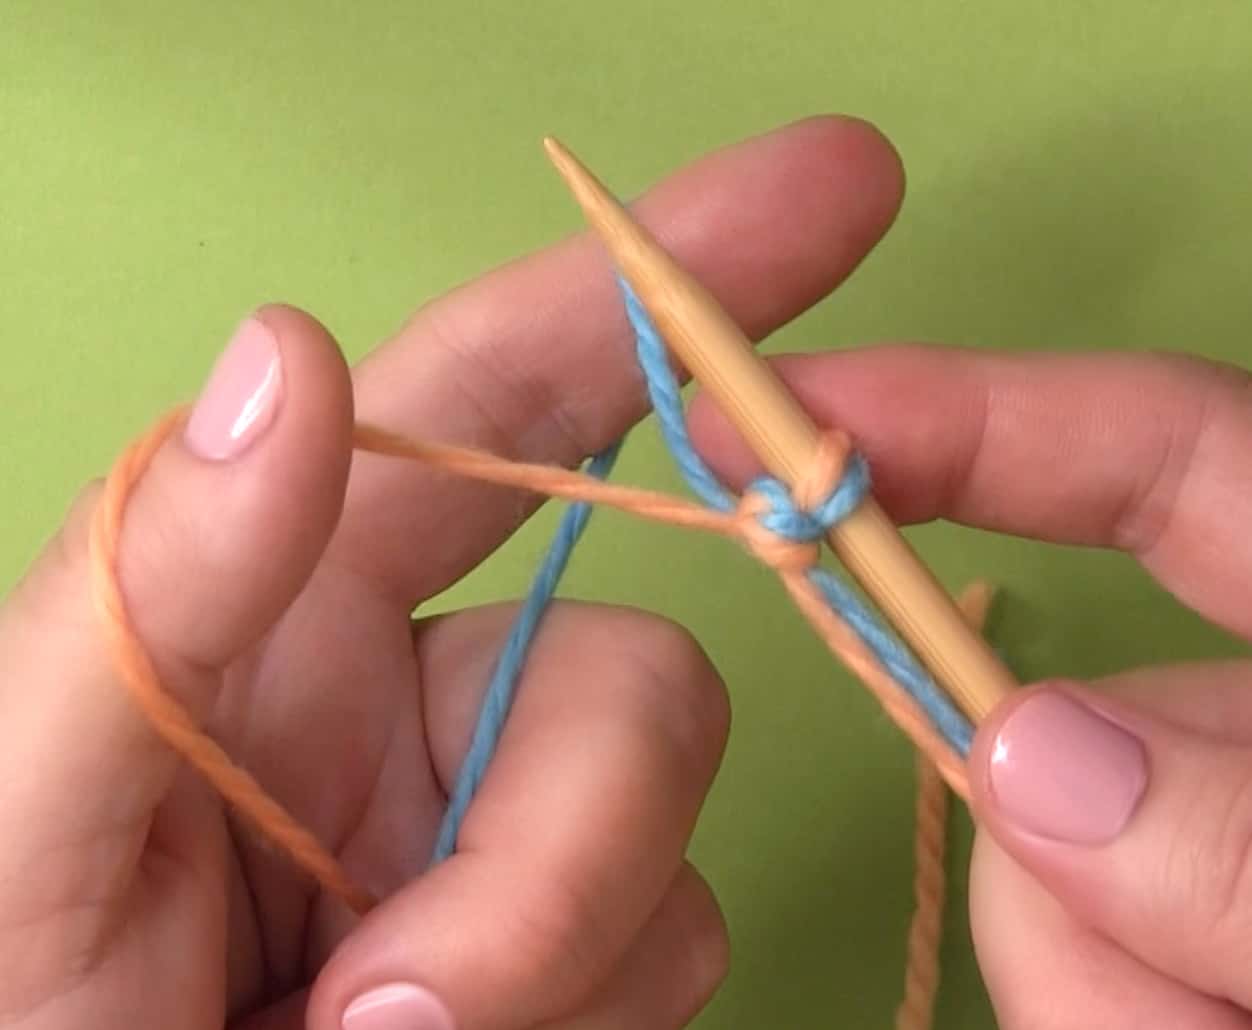 Hands holding one knitting needle with two yarn colors in the slingshot hold.